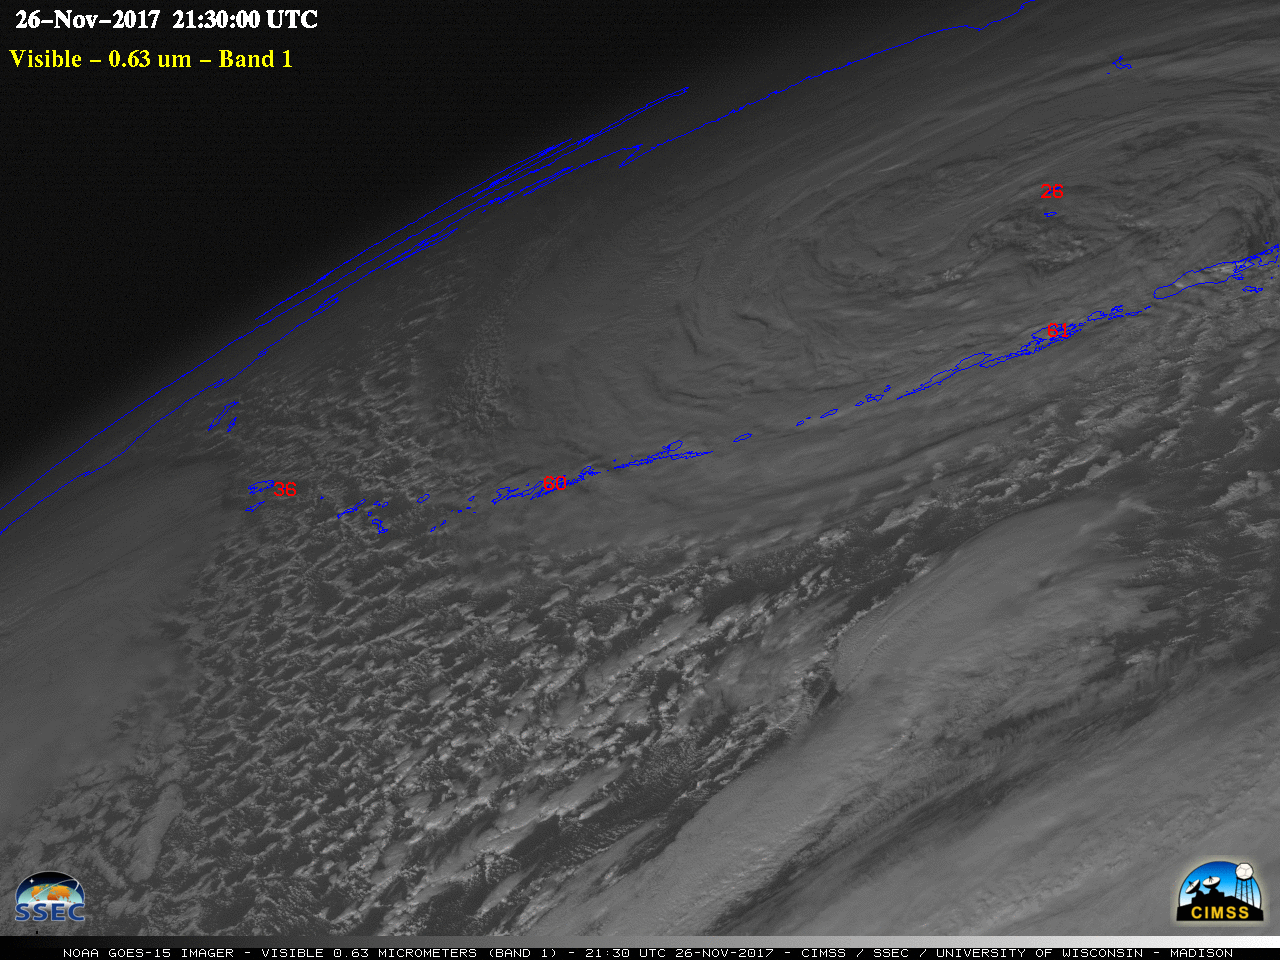 GOES-15 Visible (0.63 µm) images, with hourly surface wind gusts (knots) plotted in red [click to play animation]